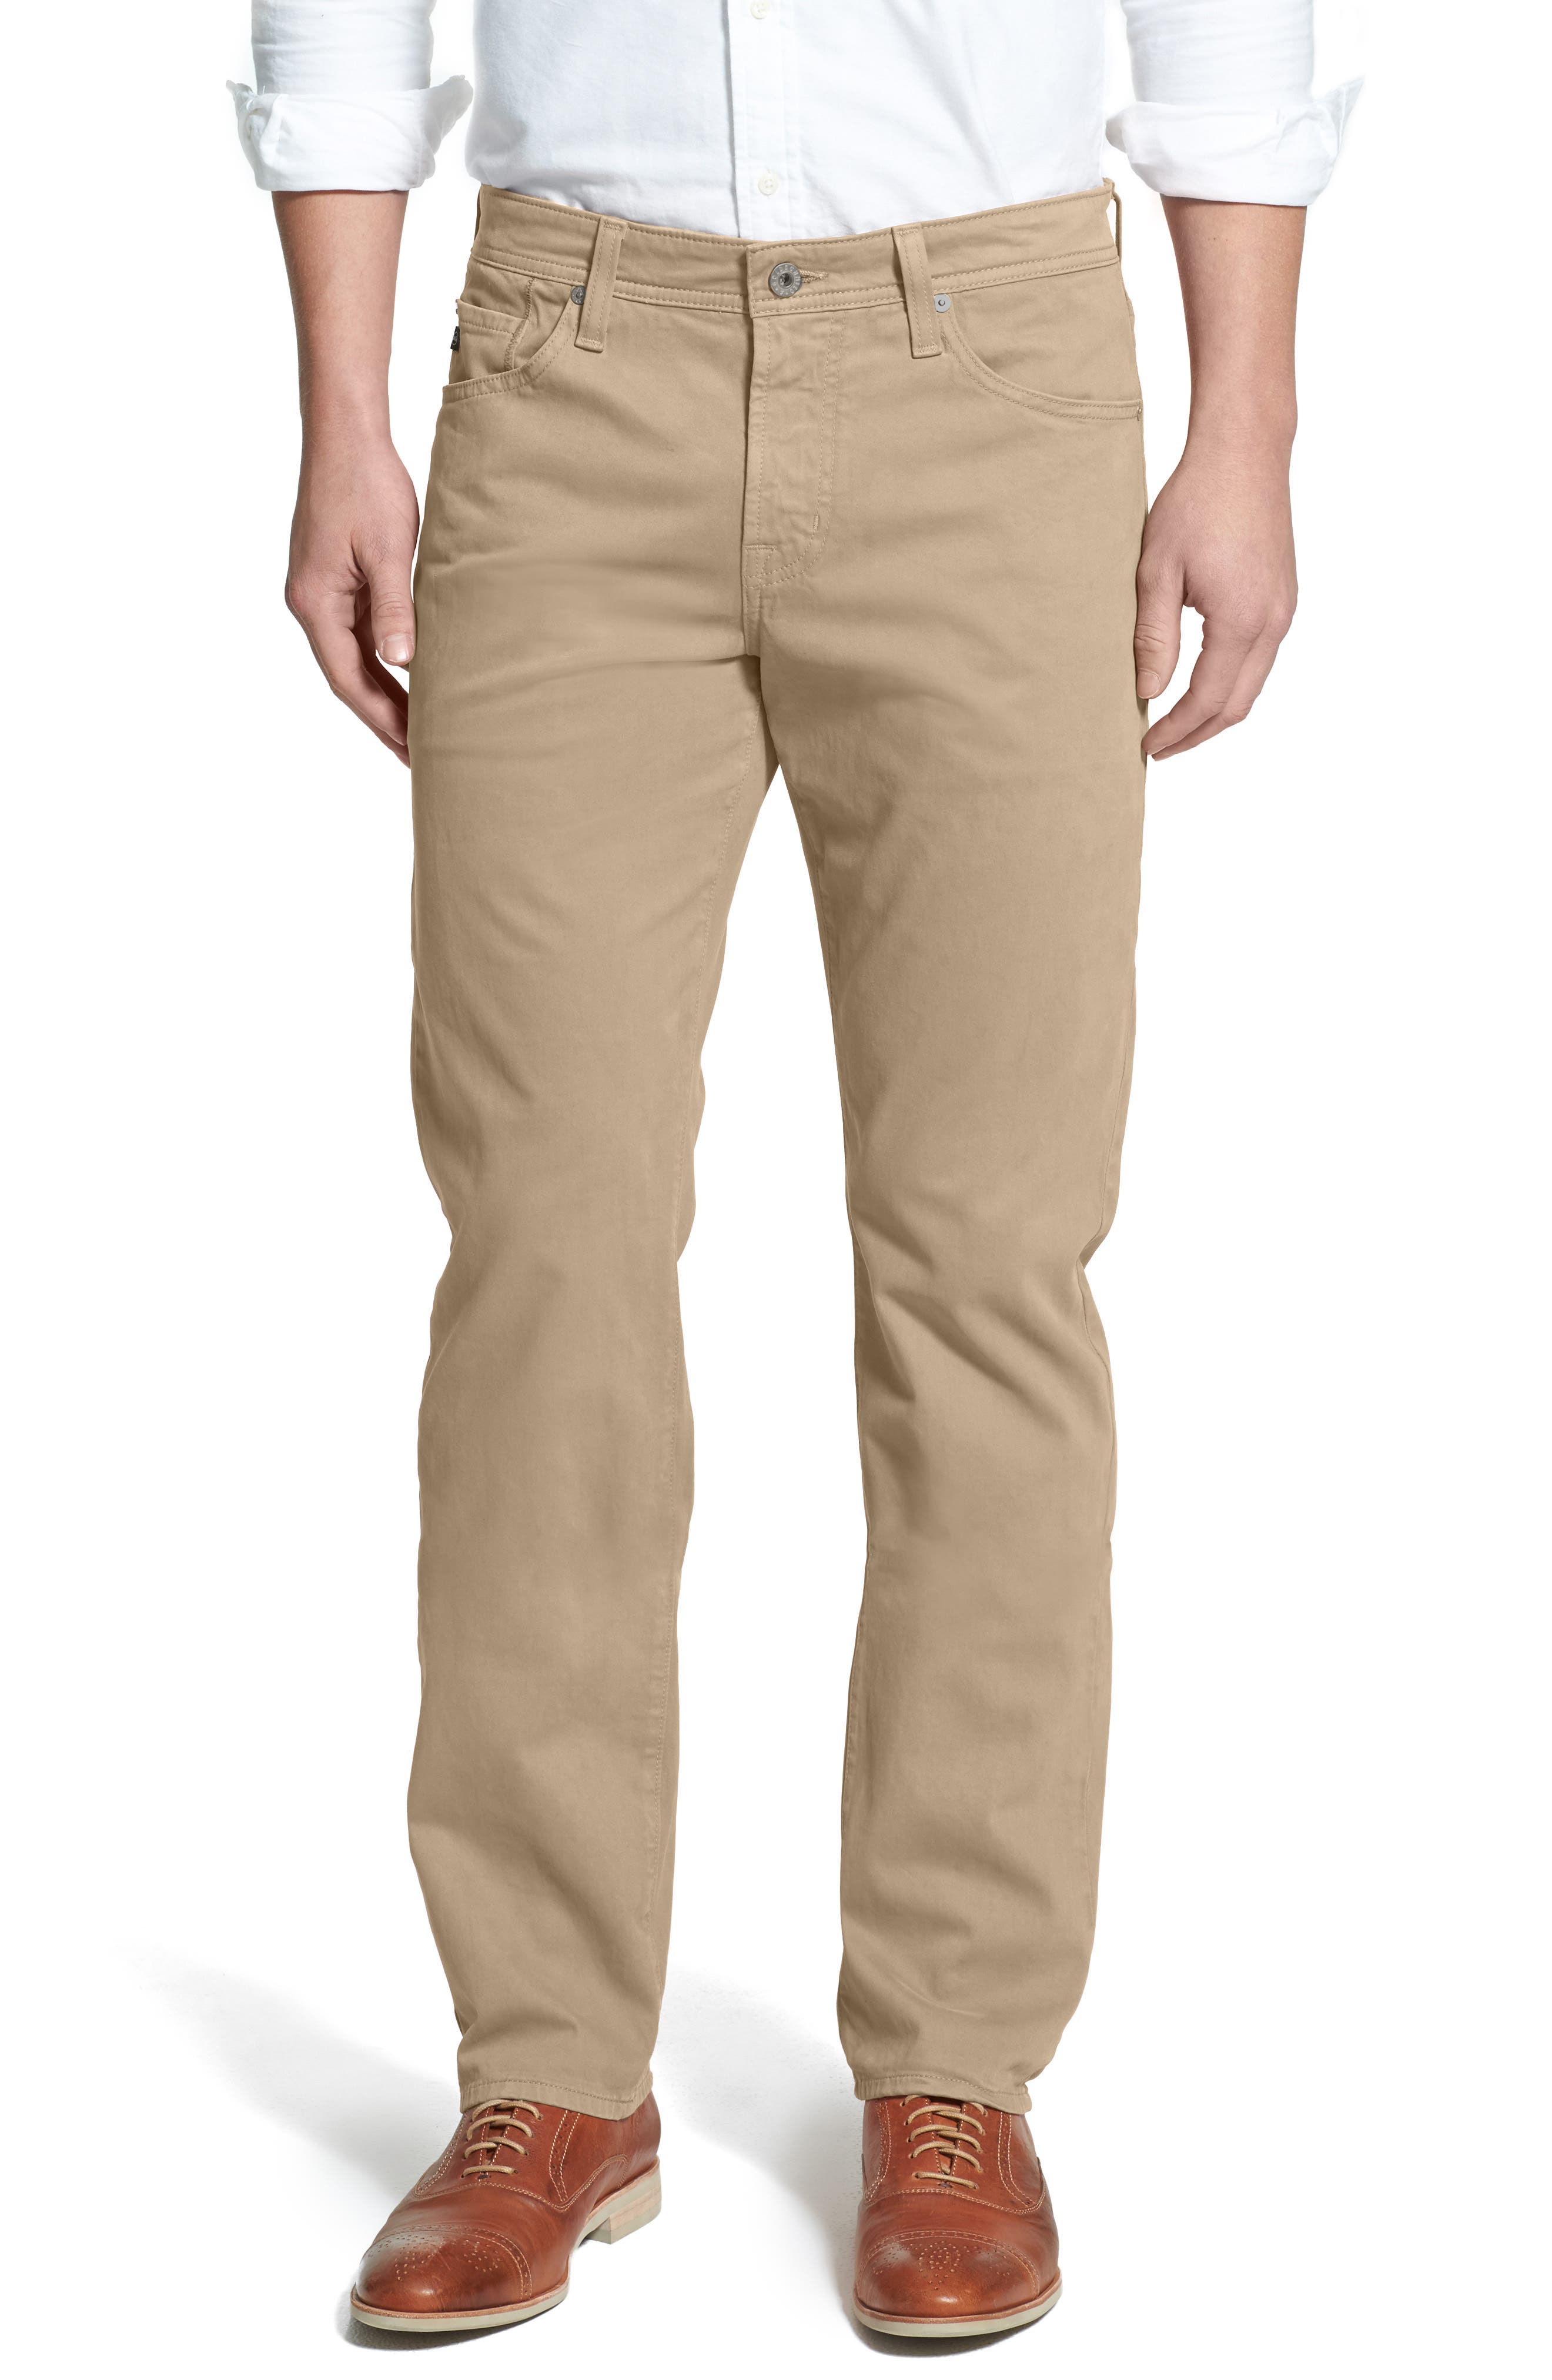 AG Adriano Goldschmied Mens Graduate Tailored Leg sud Pant